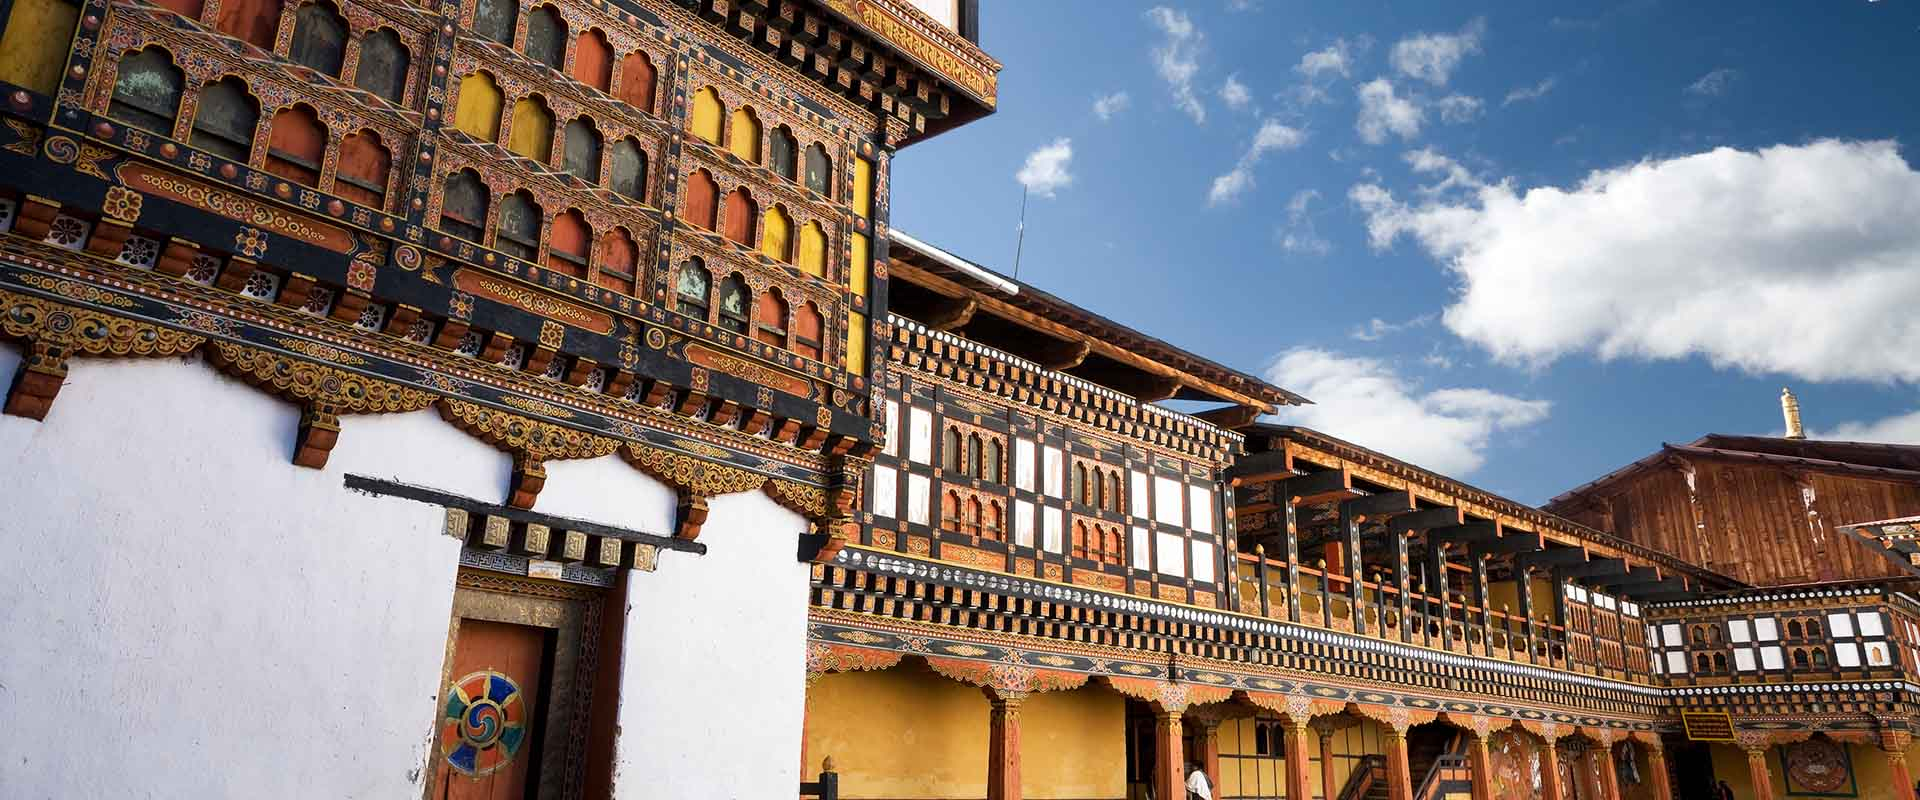 Losar New Year 2021 2022 And 2023 In Bhutan PublicHolidays asia